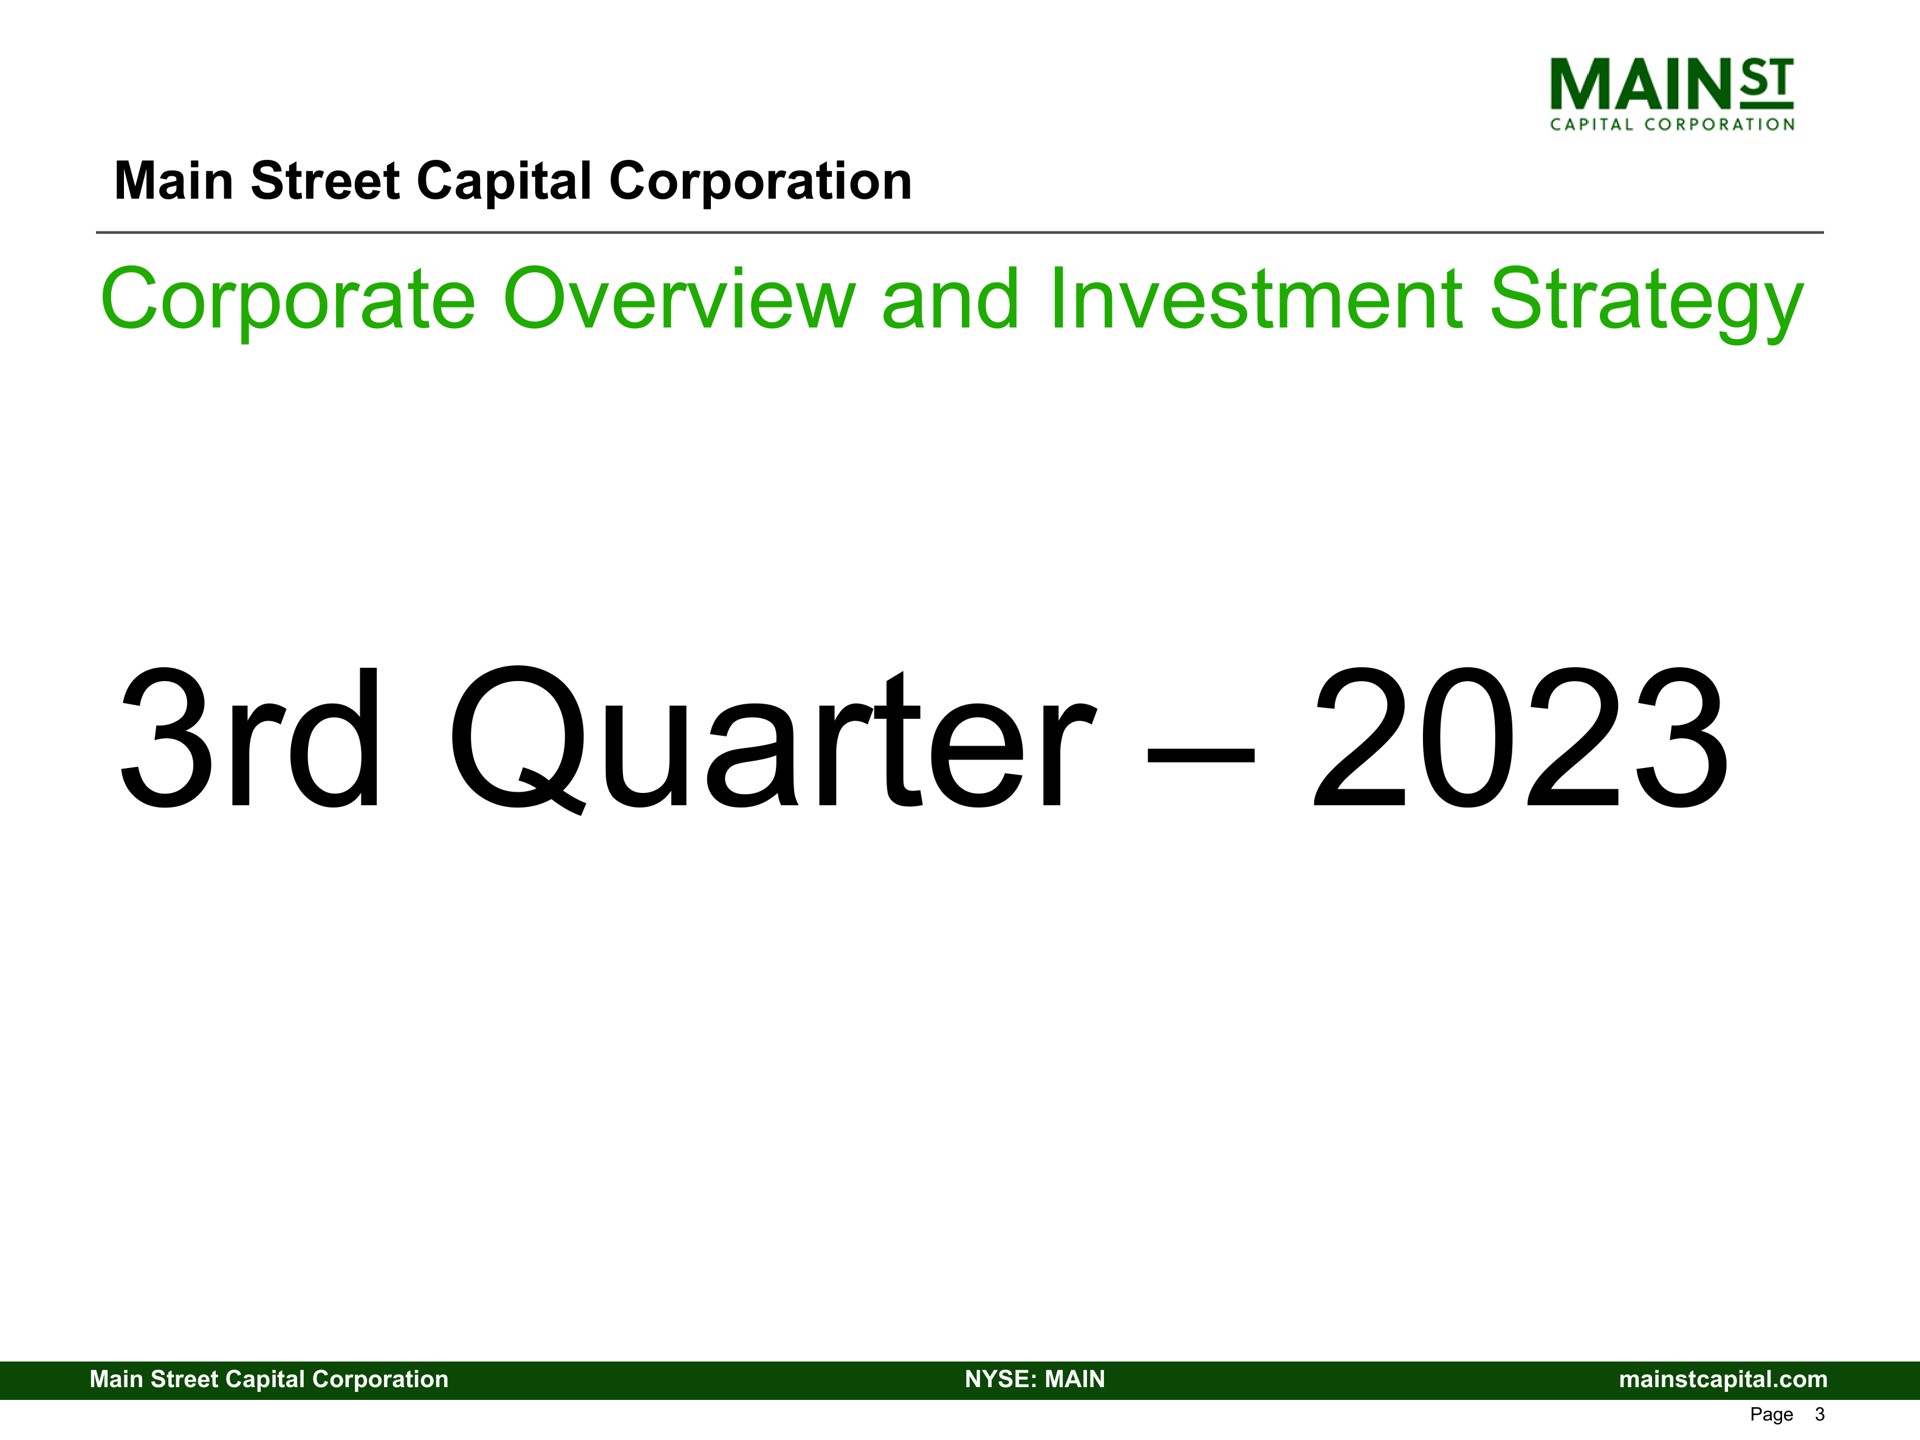 main street capital corporation corporate overview and investment strategy quarter | Main Street Capital